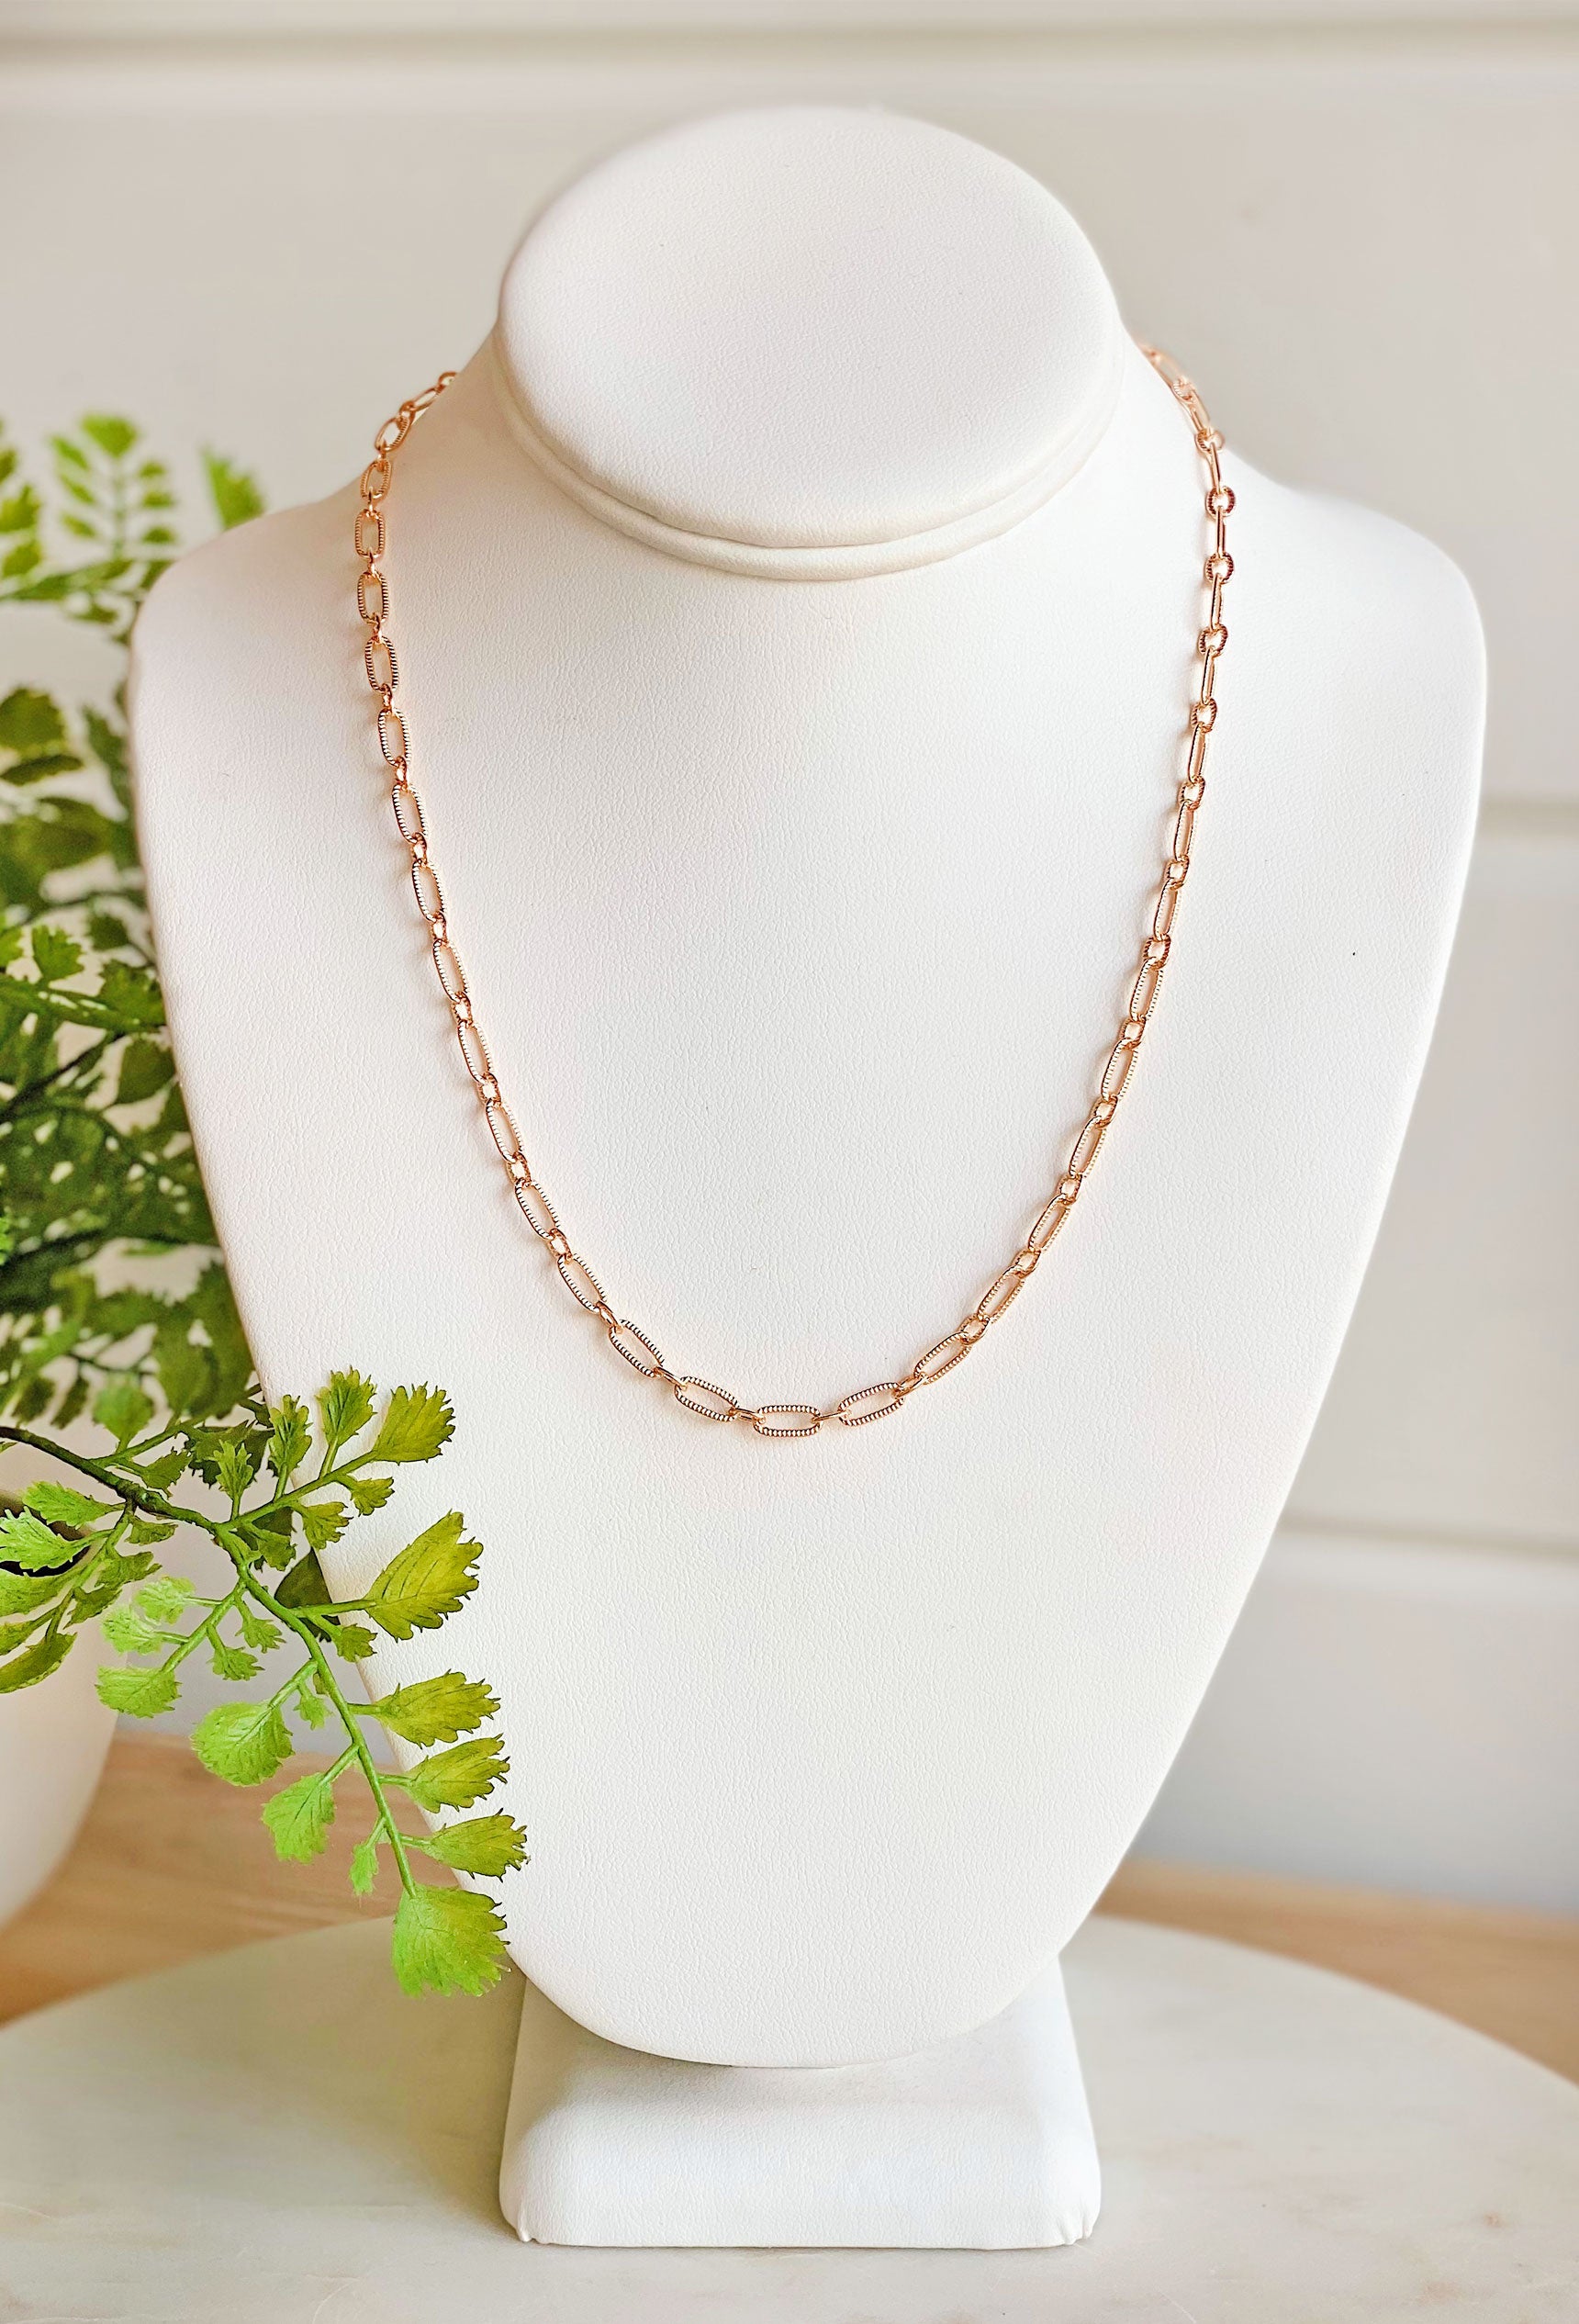 Off The Hook Chain Necklace, gold chain dainty necklace, lobster clasp